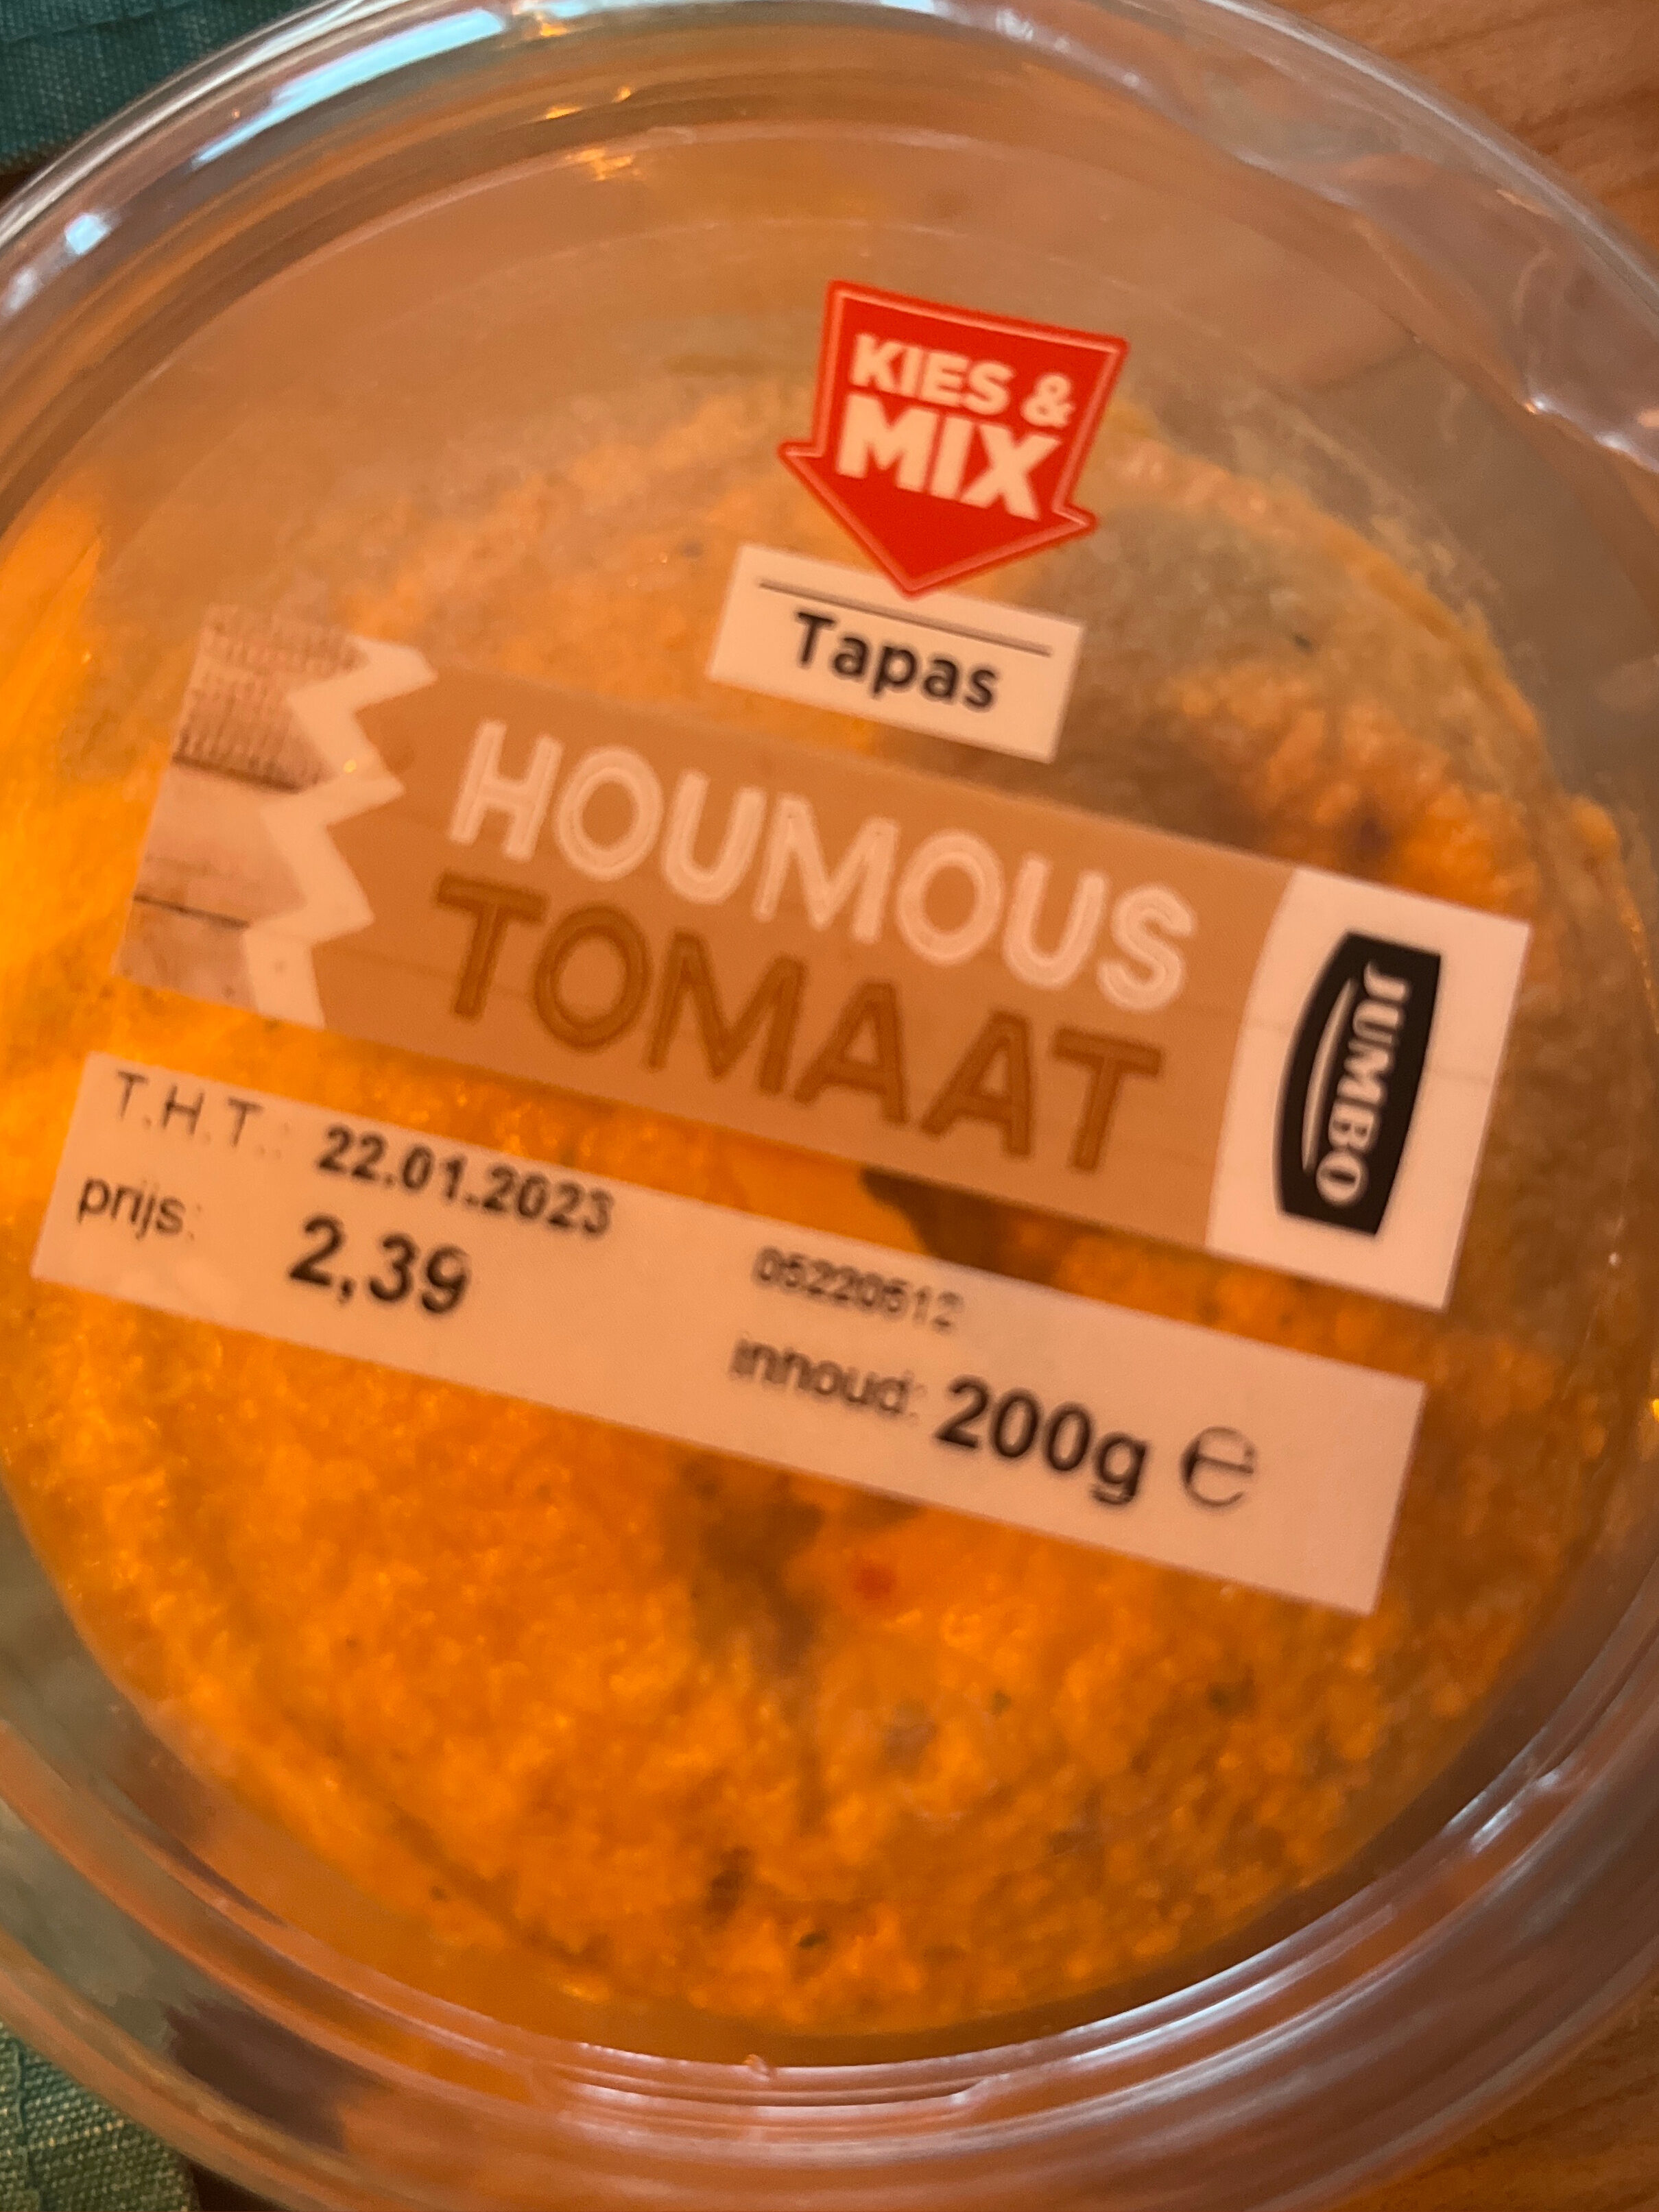 Houmous Tomaat - Product